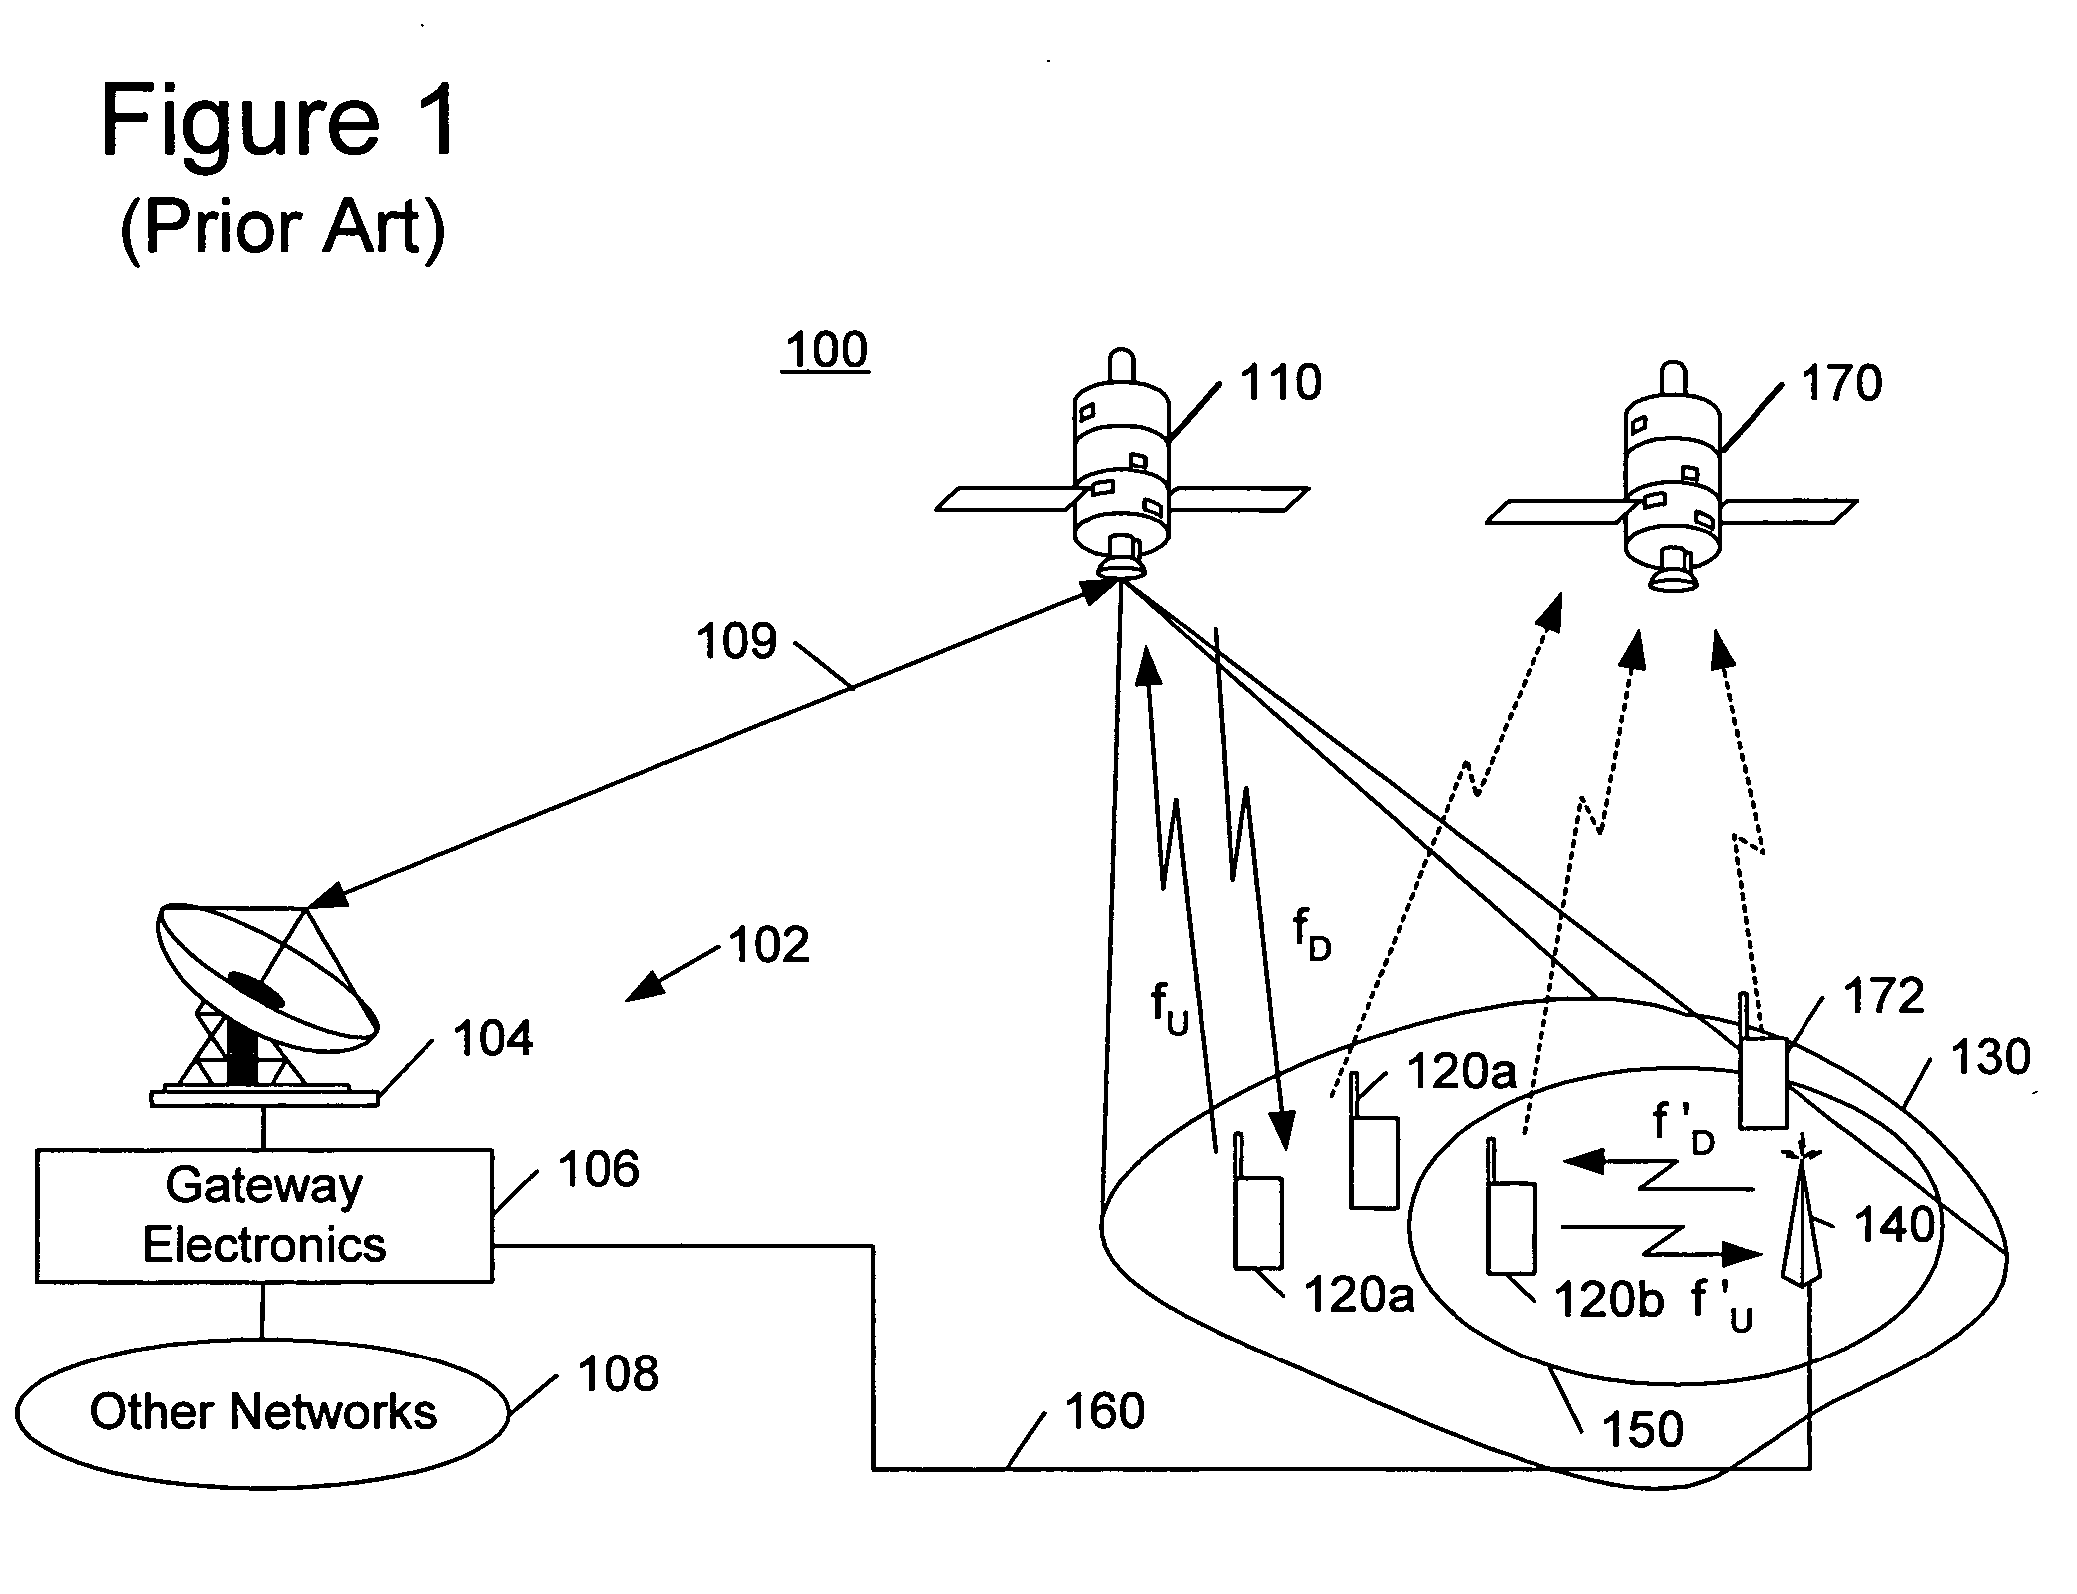 Prediction of uplink interference potential generated by an ancillary terrestrial network and/or radioterminals